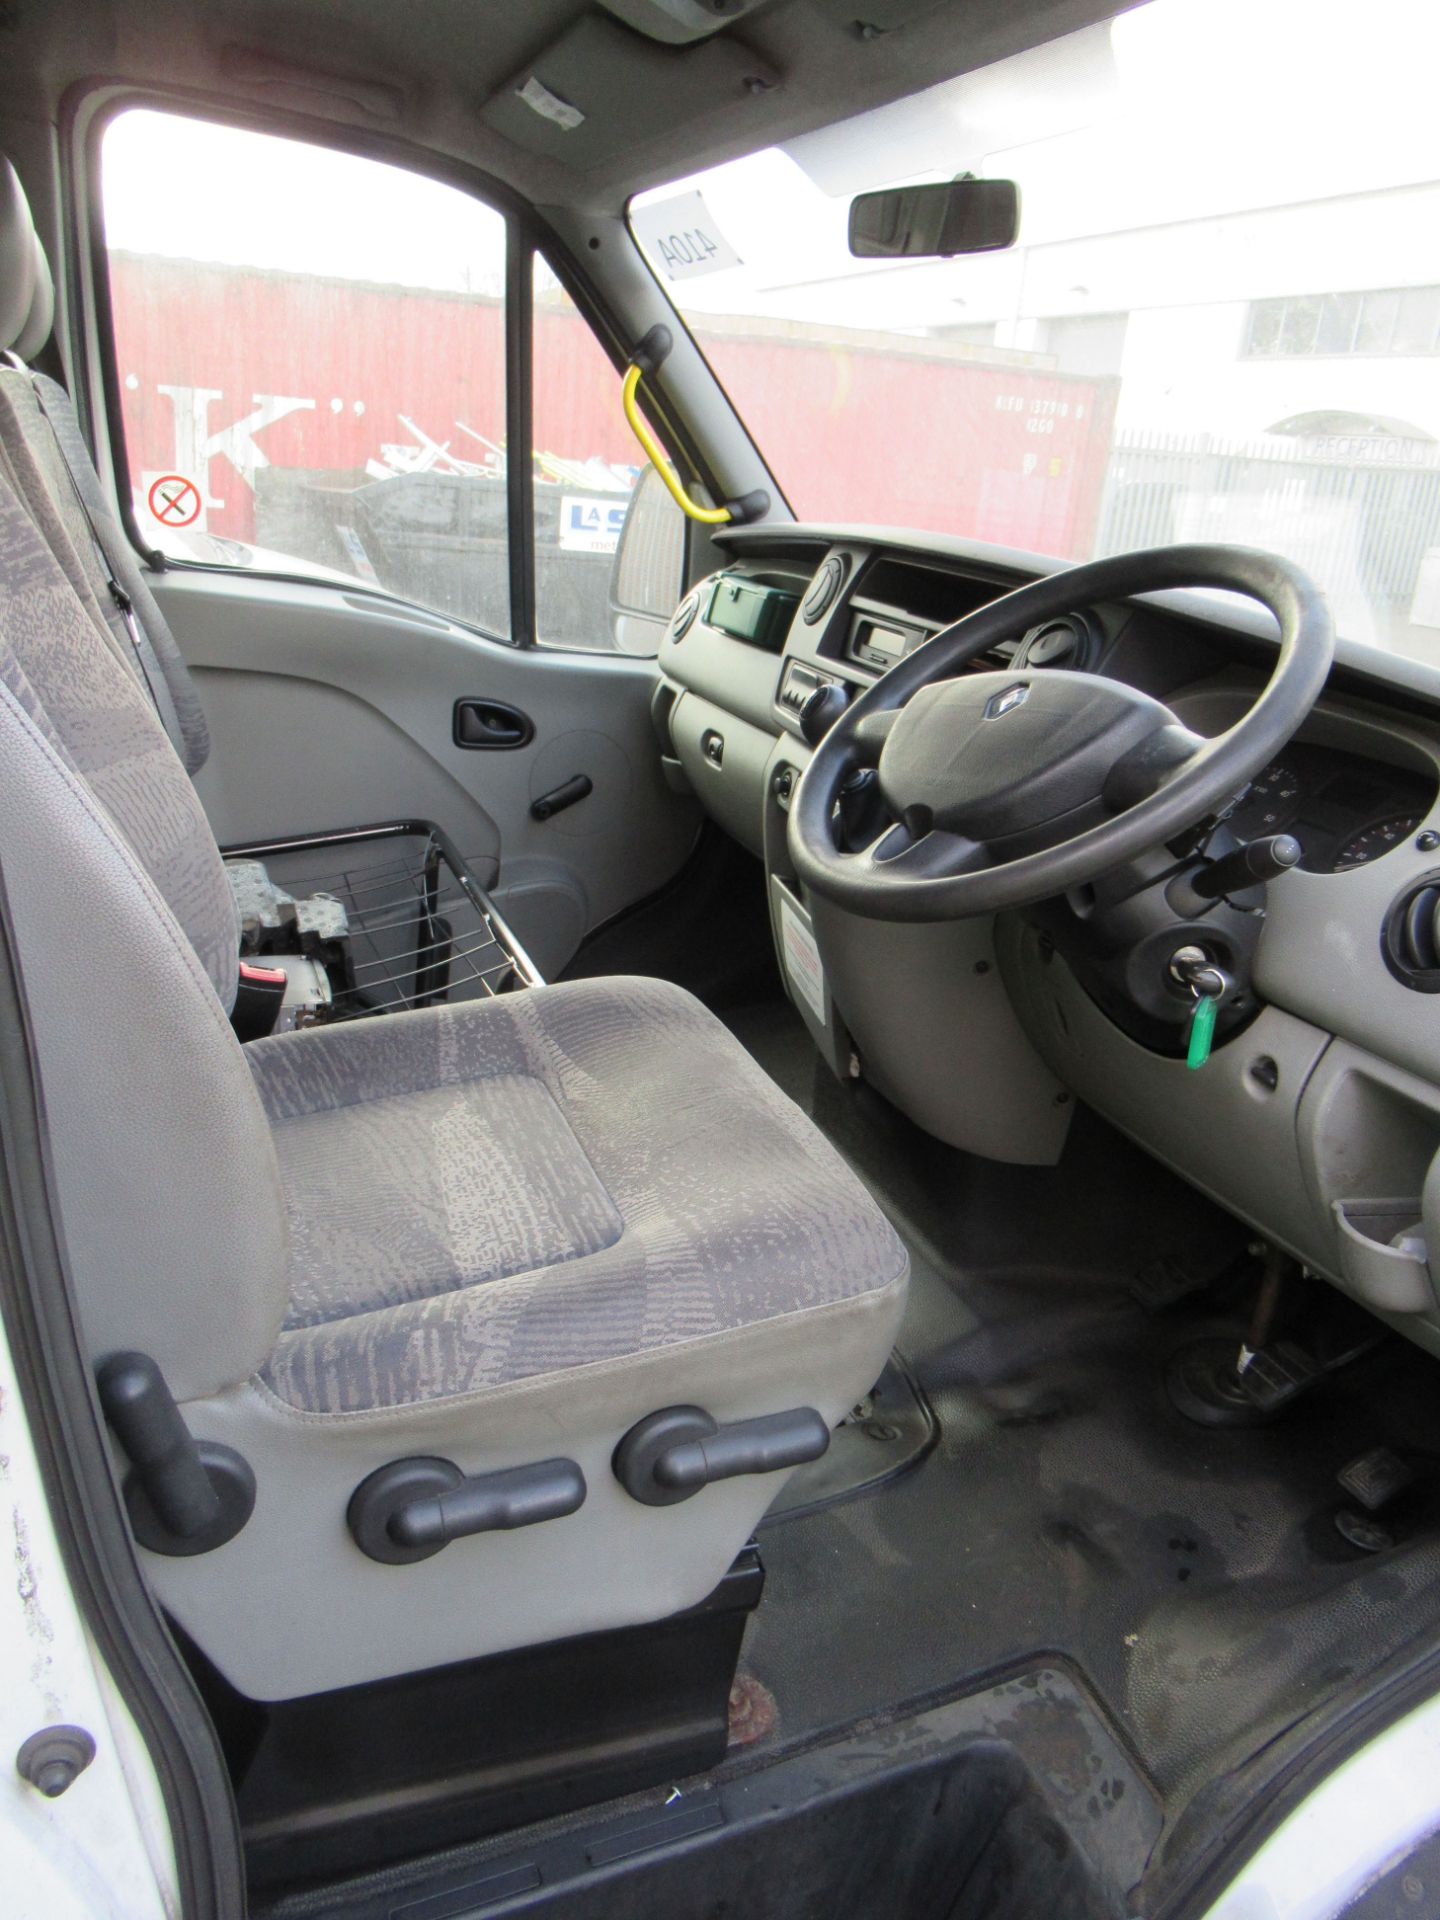 A Renault Dci 120 Mini Bus - Image 15 of 21